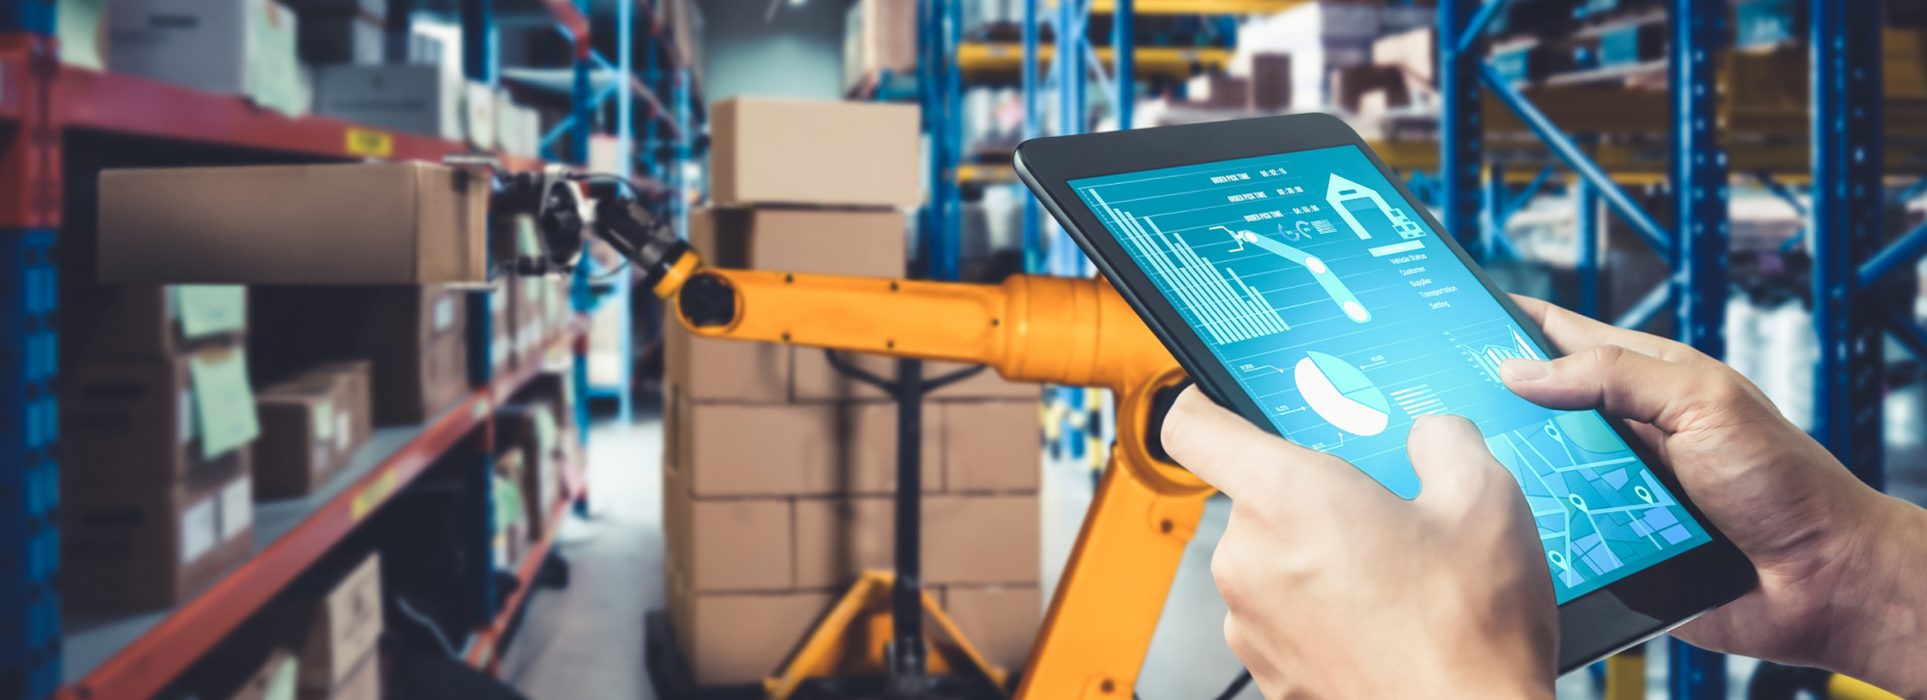 Improve Efficiency with Smart Warehouse Automation